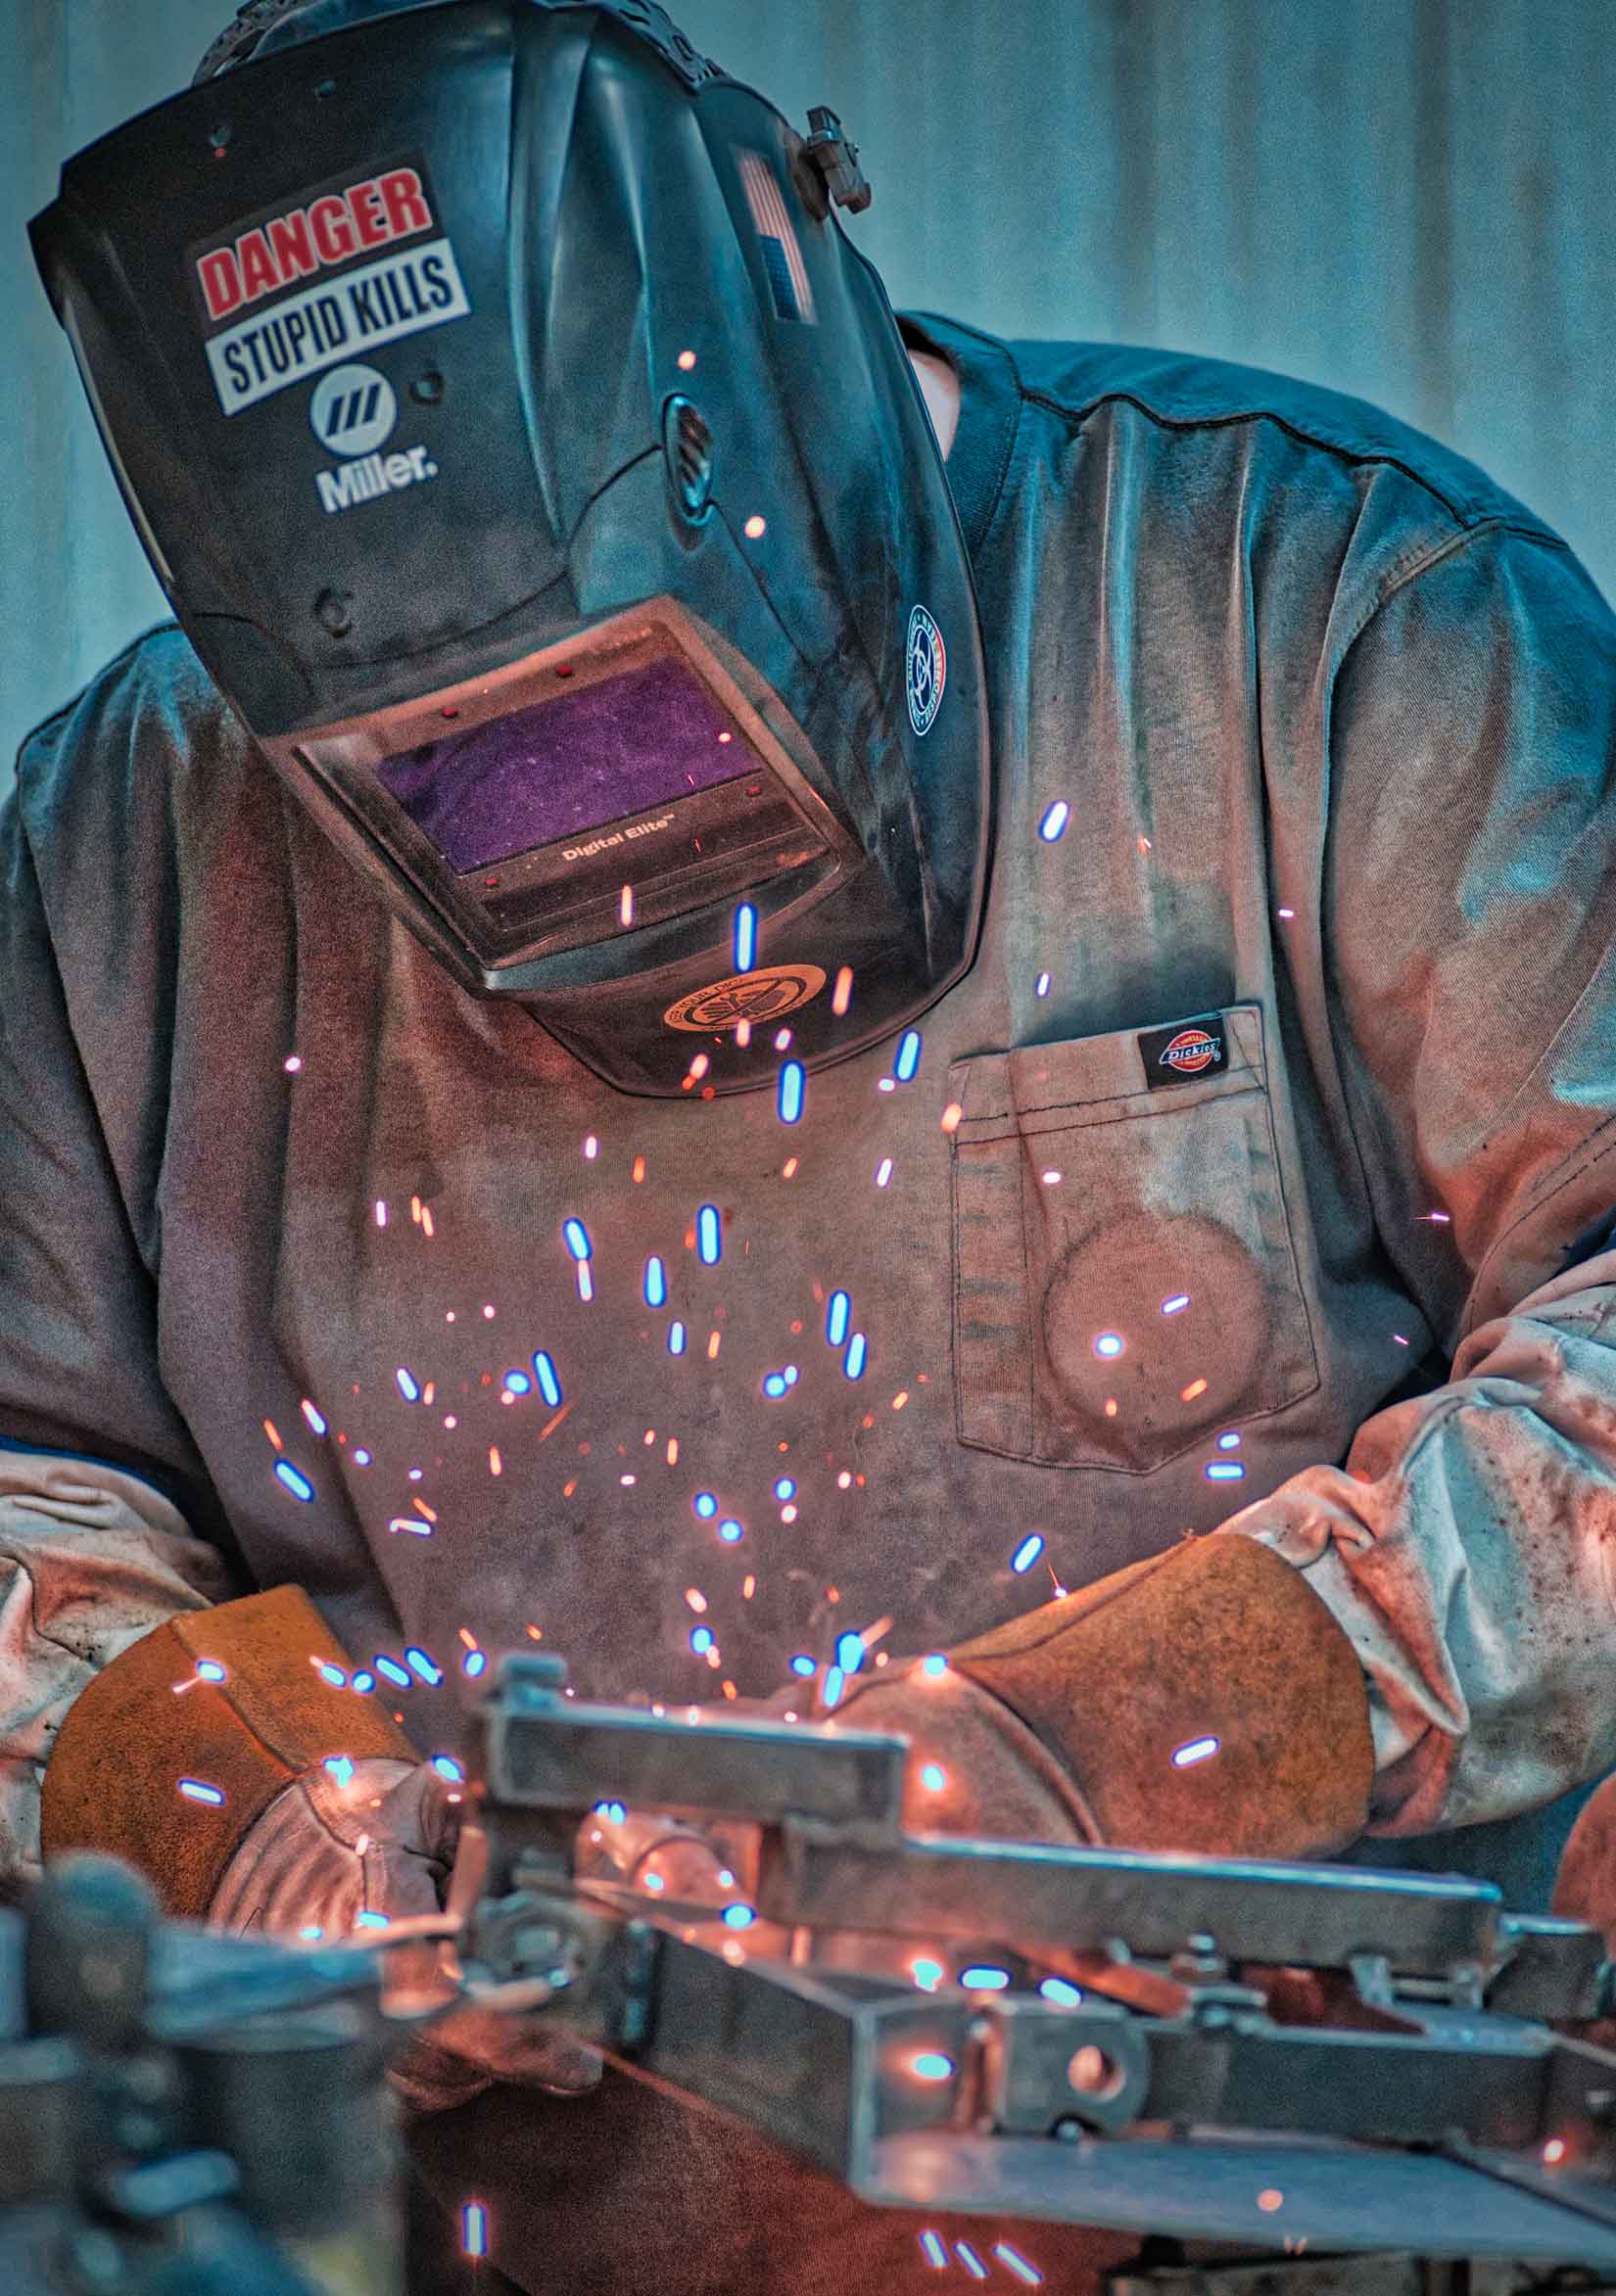 A professional photo of a welder working while wearing a welding mask and gloves